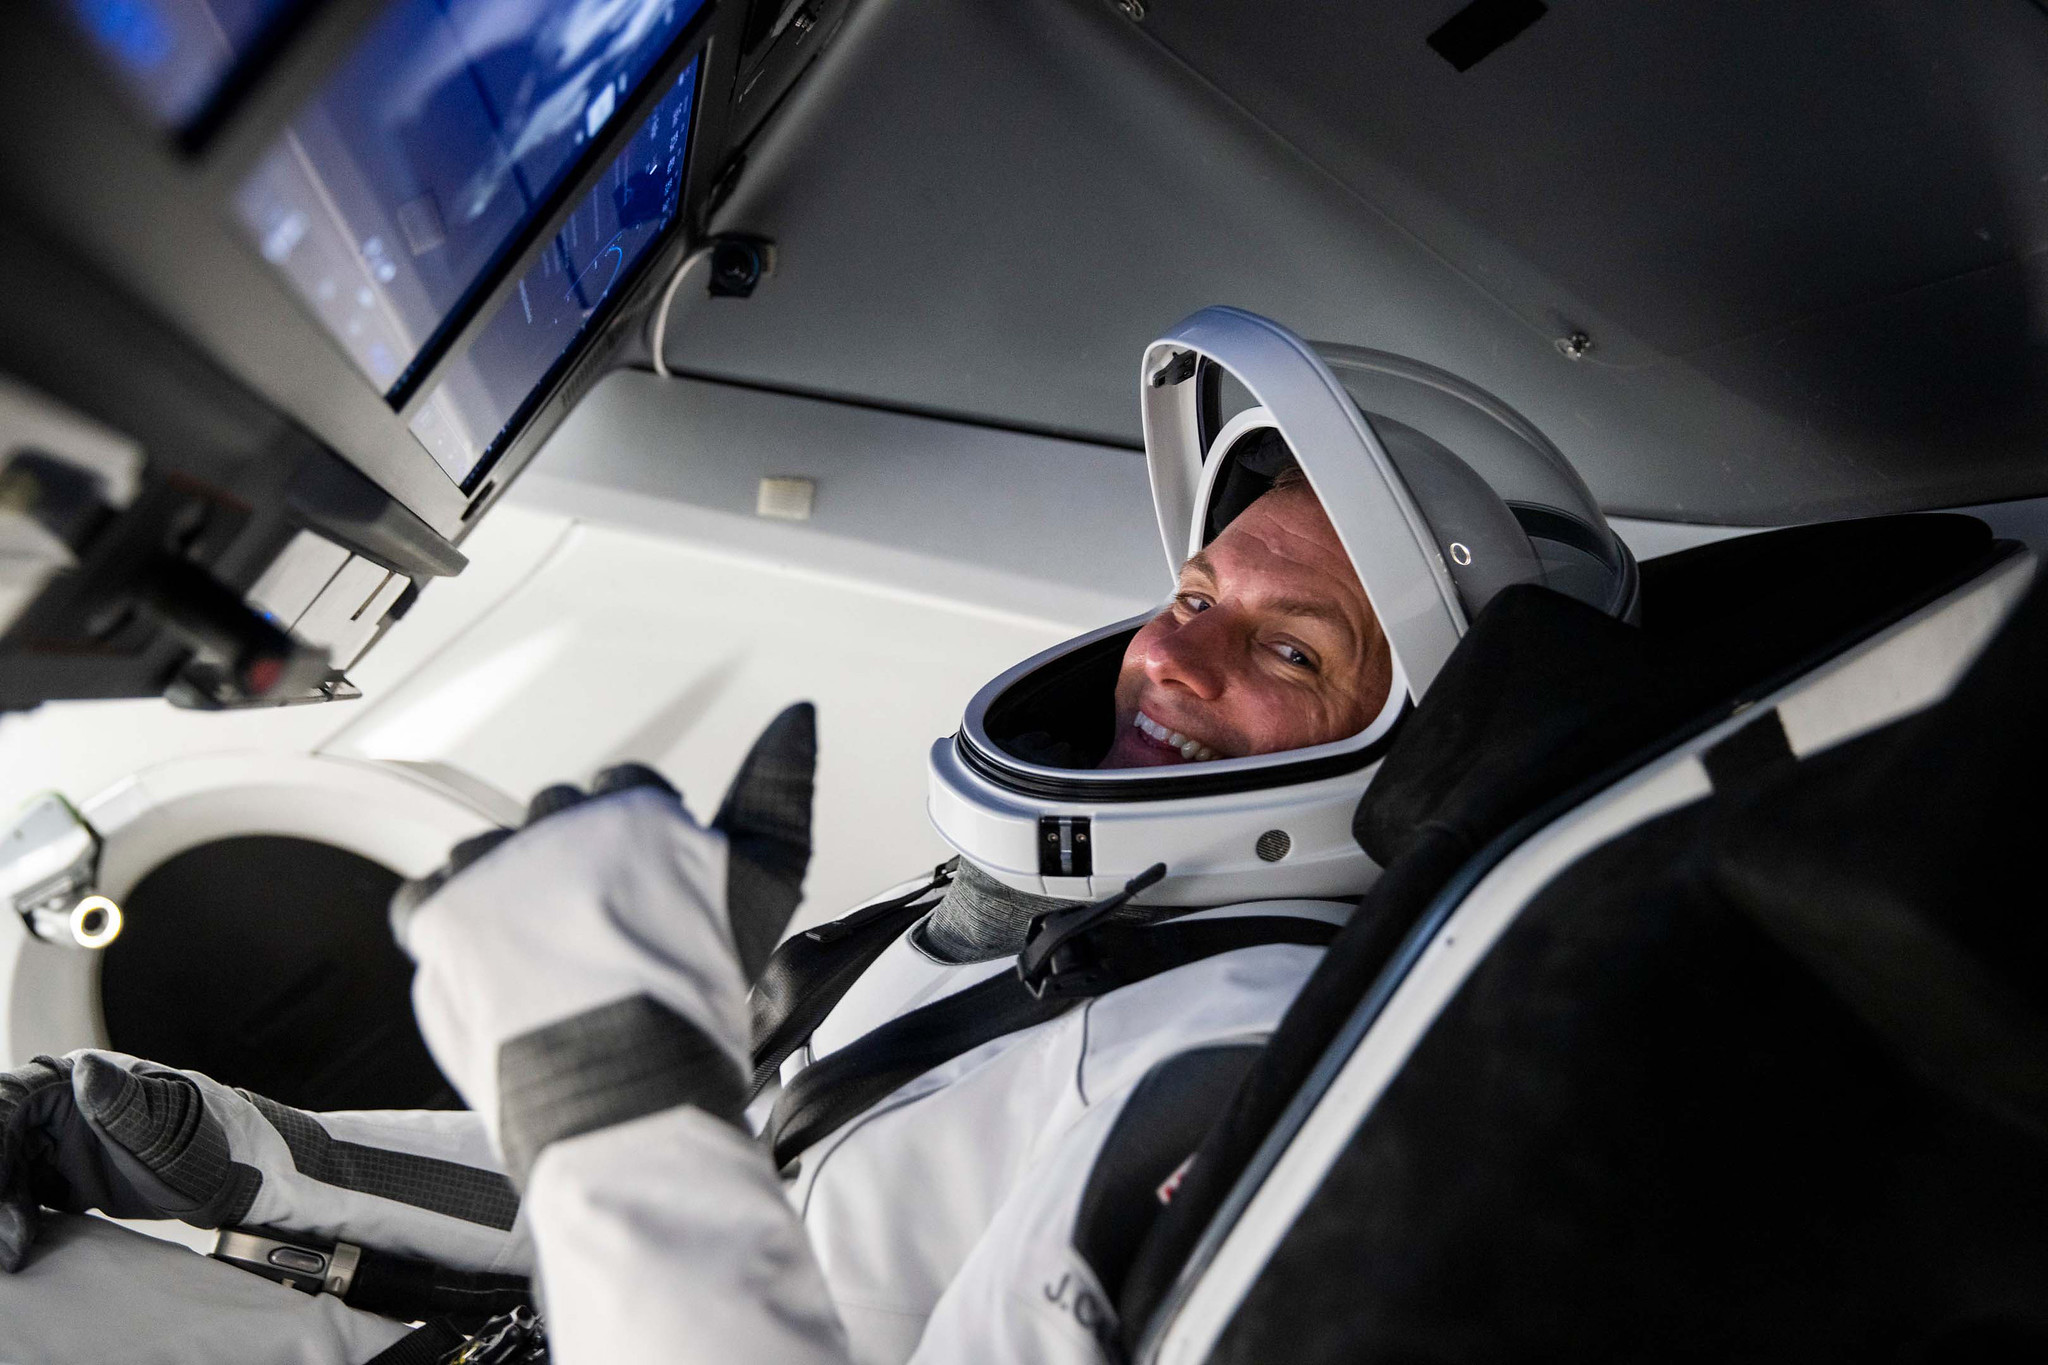 SpaceX Crew-5 Pilot Josh Cassada of NASA is pictured during a Crew Dragon cockpit training session at SpaceX headquarters in Hawthorne, California.